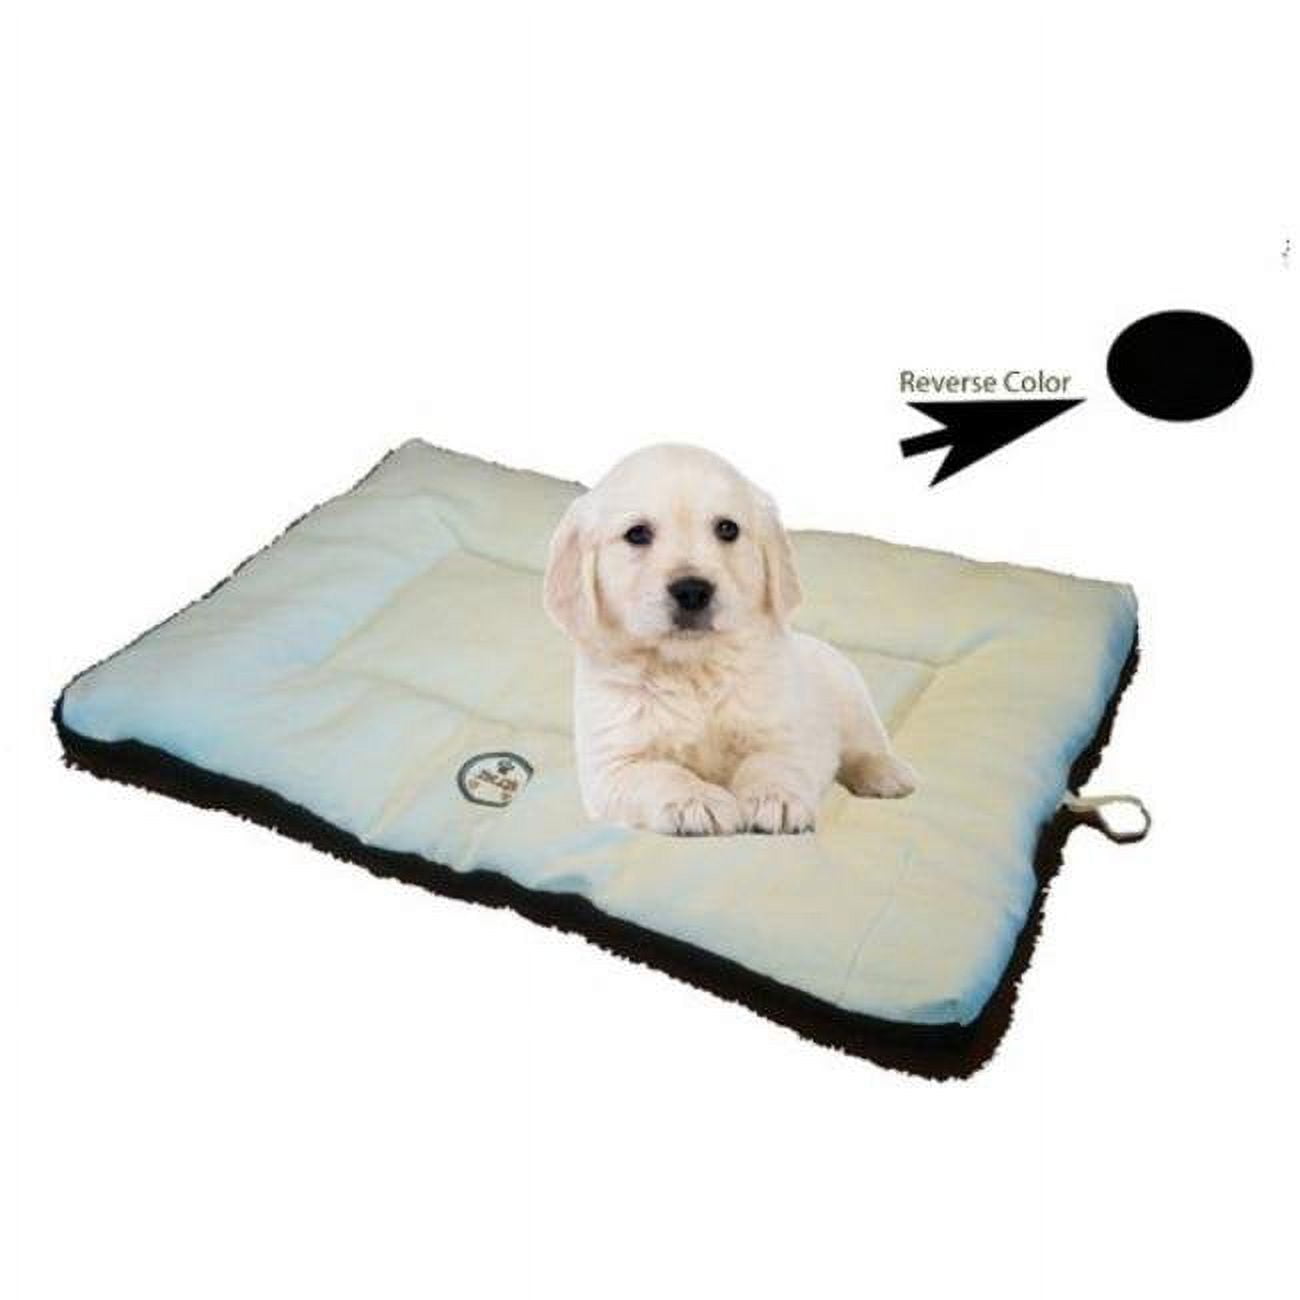 Reversible Waterproof Dog Bed Pad for Camping Travel, Portable Car Seat Pet Cushion Mat with Handles for Small Medium Dogs Cats Catalonia Size: Medium